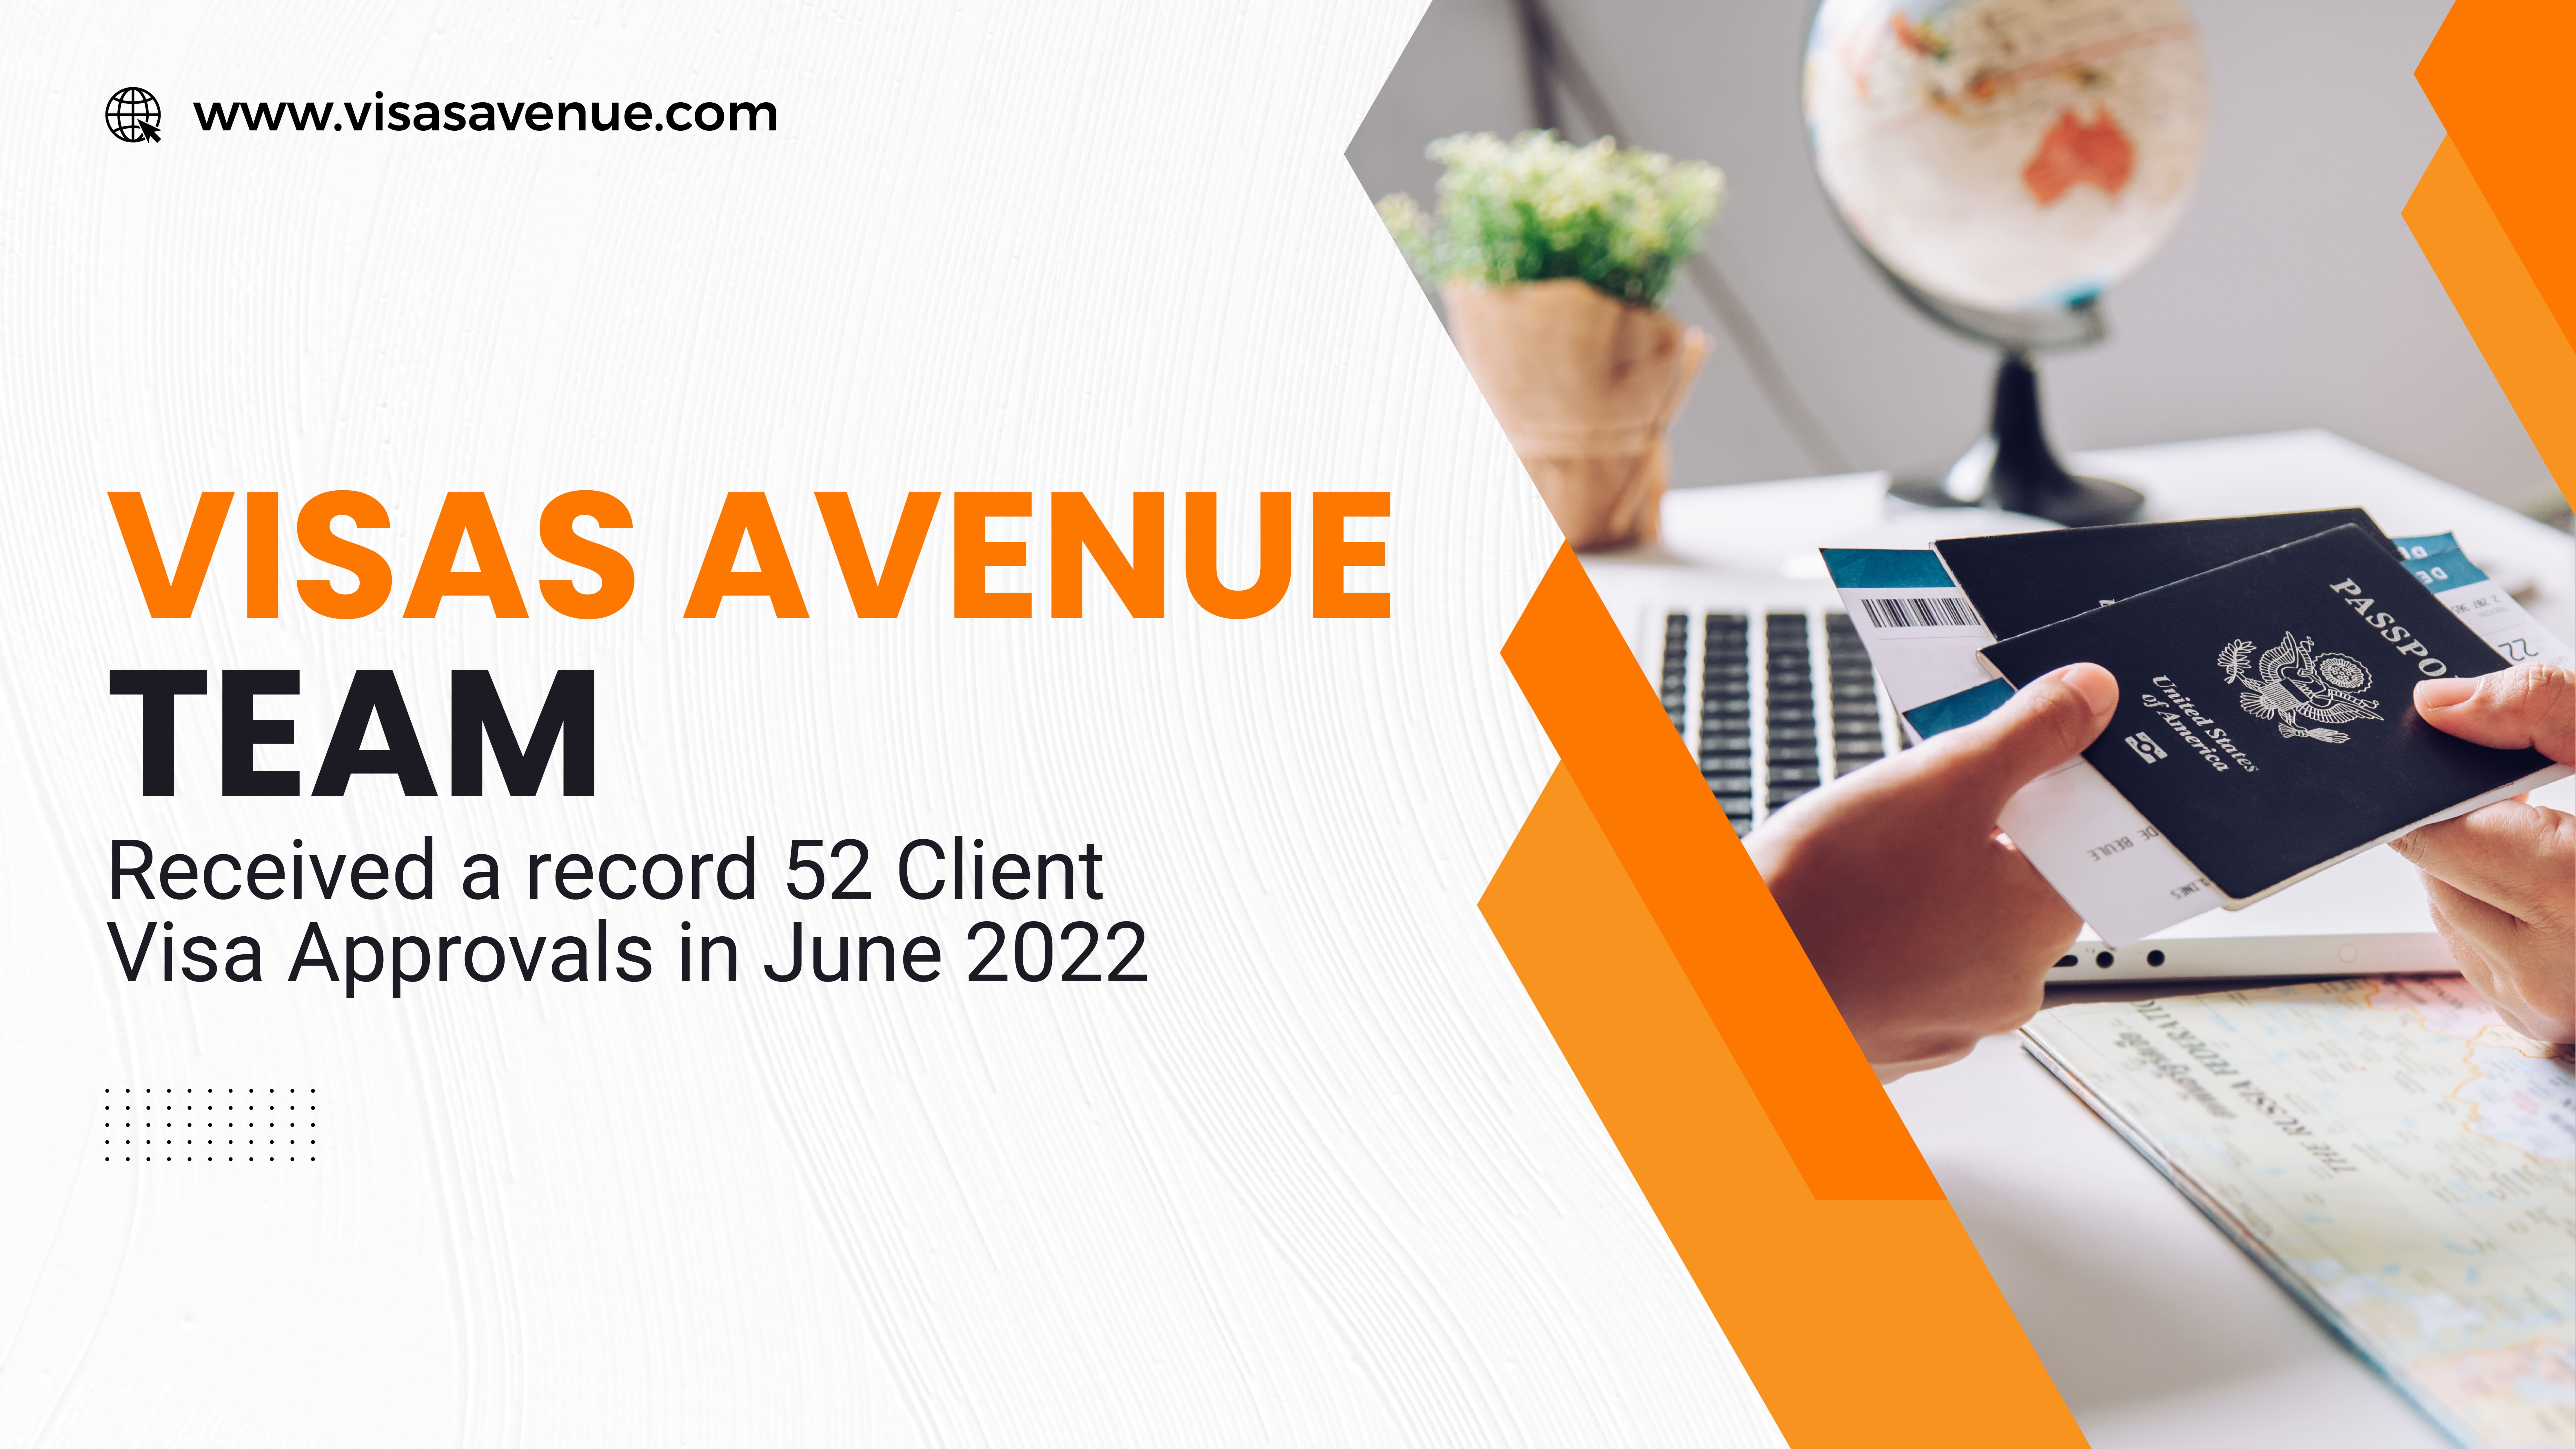 Jubilant June for Team Visas Avenue- Received Record 52 Client Visa approvals in June 2022